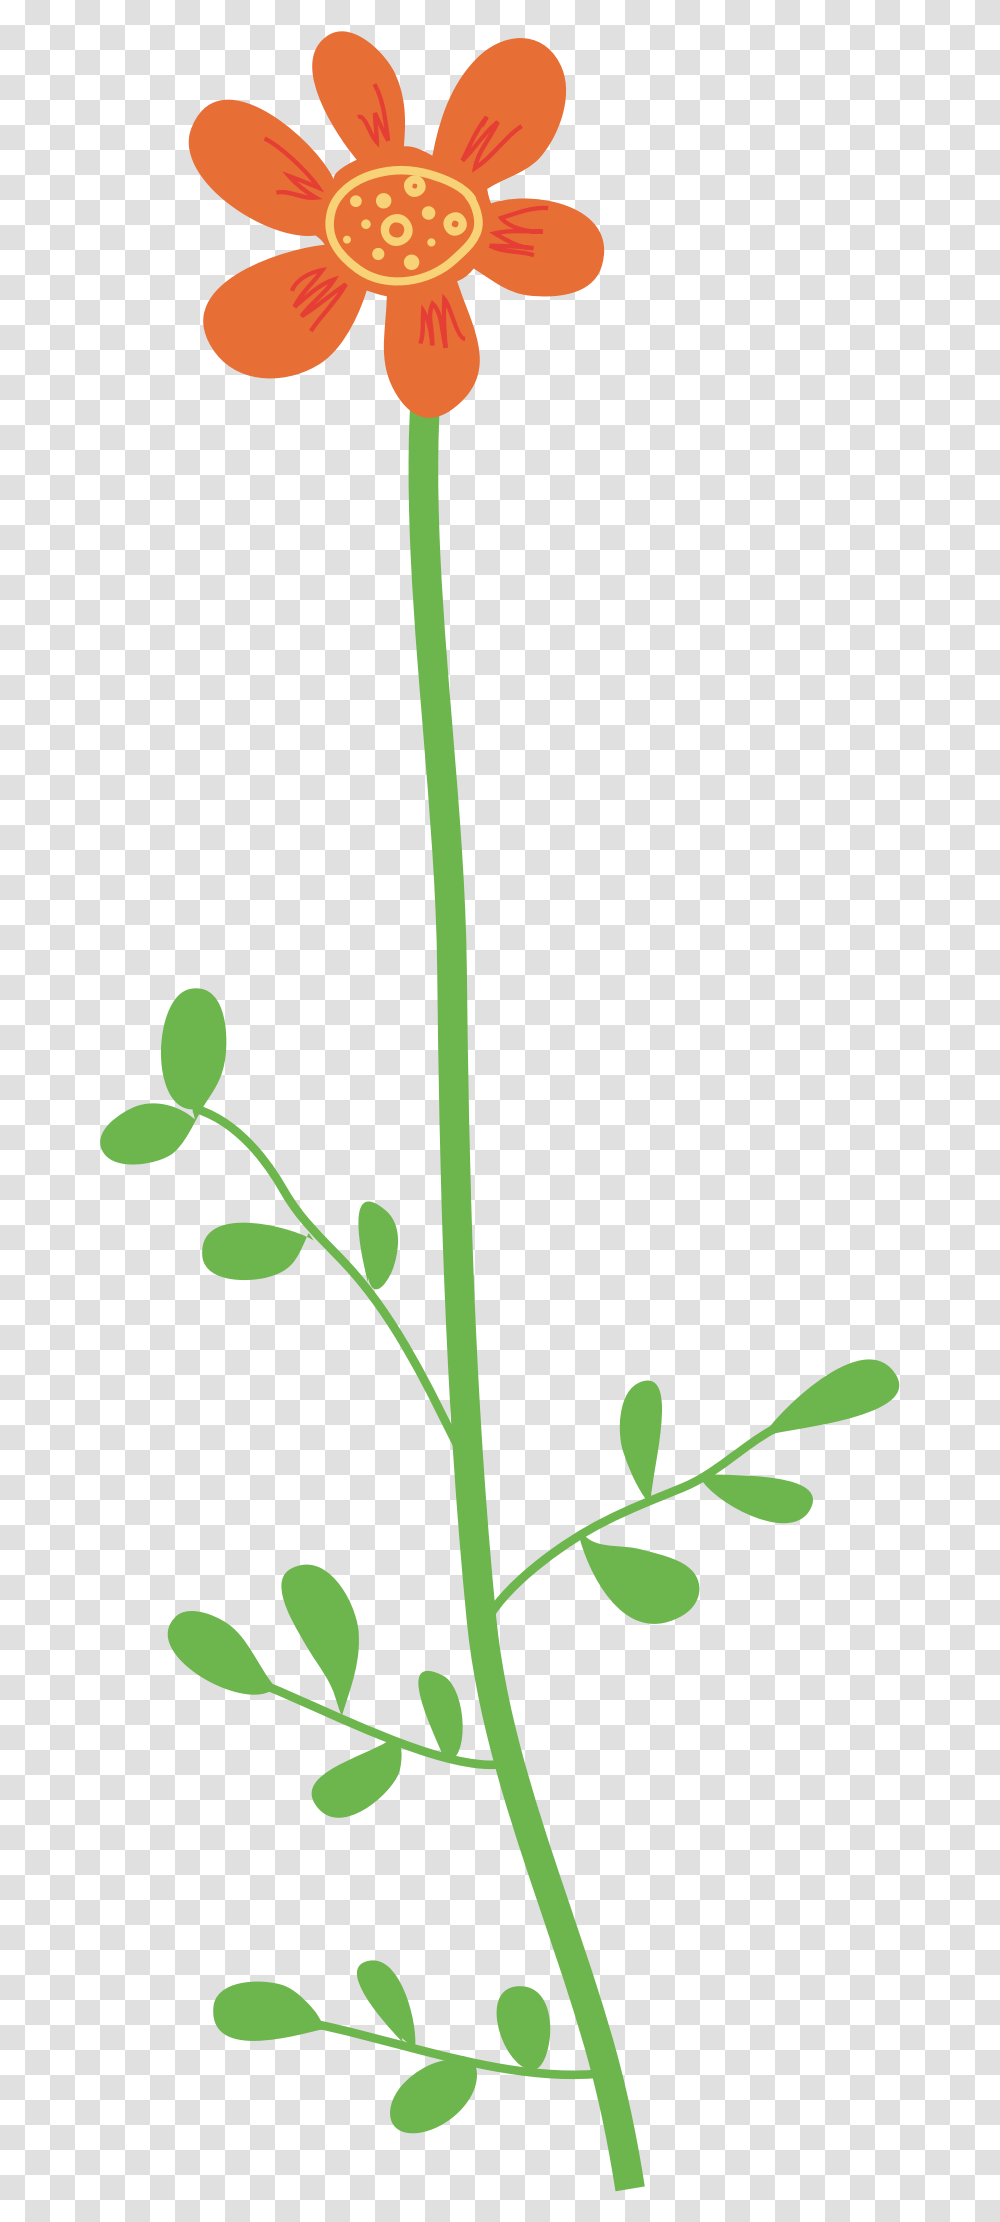 Library Of Flower With Leaves Vector Black And White Long Stem Flower Clipart, Plant, Green, Blossom, Petal Transparent Png